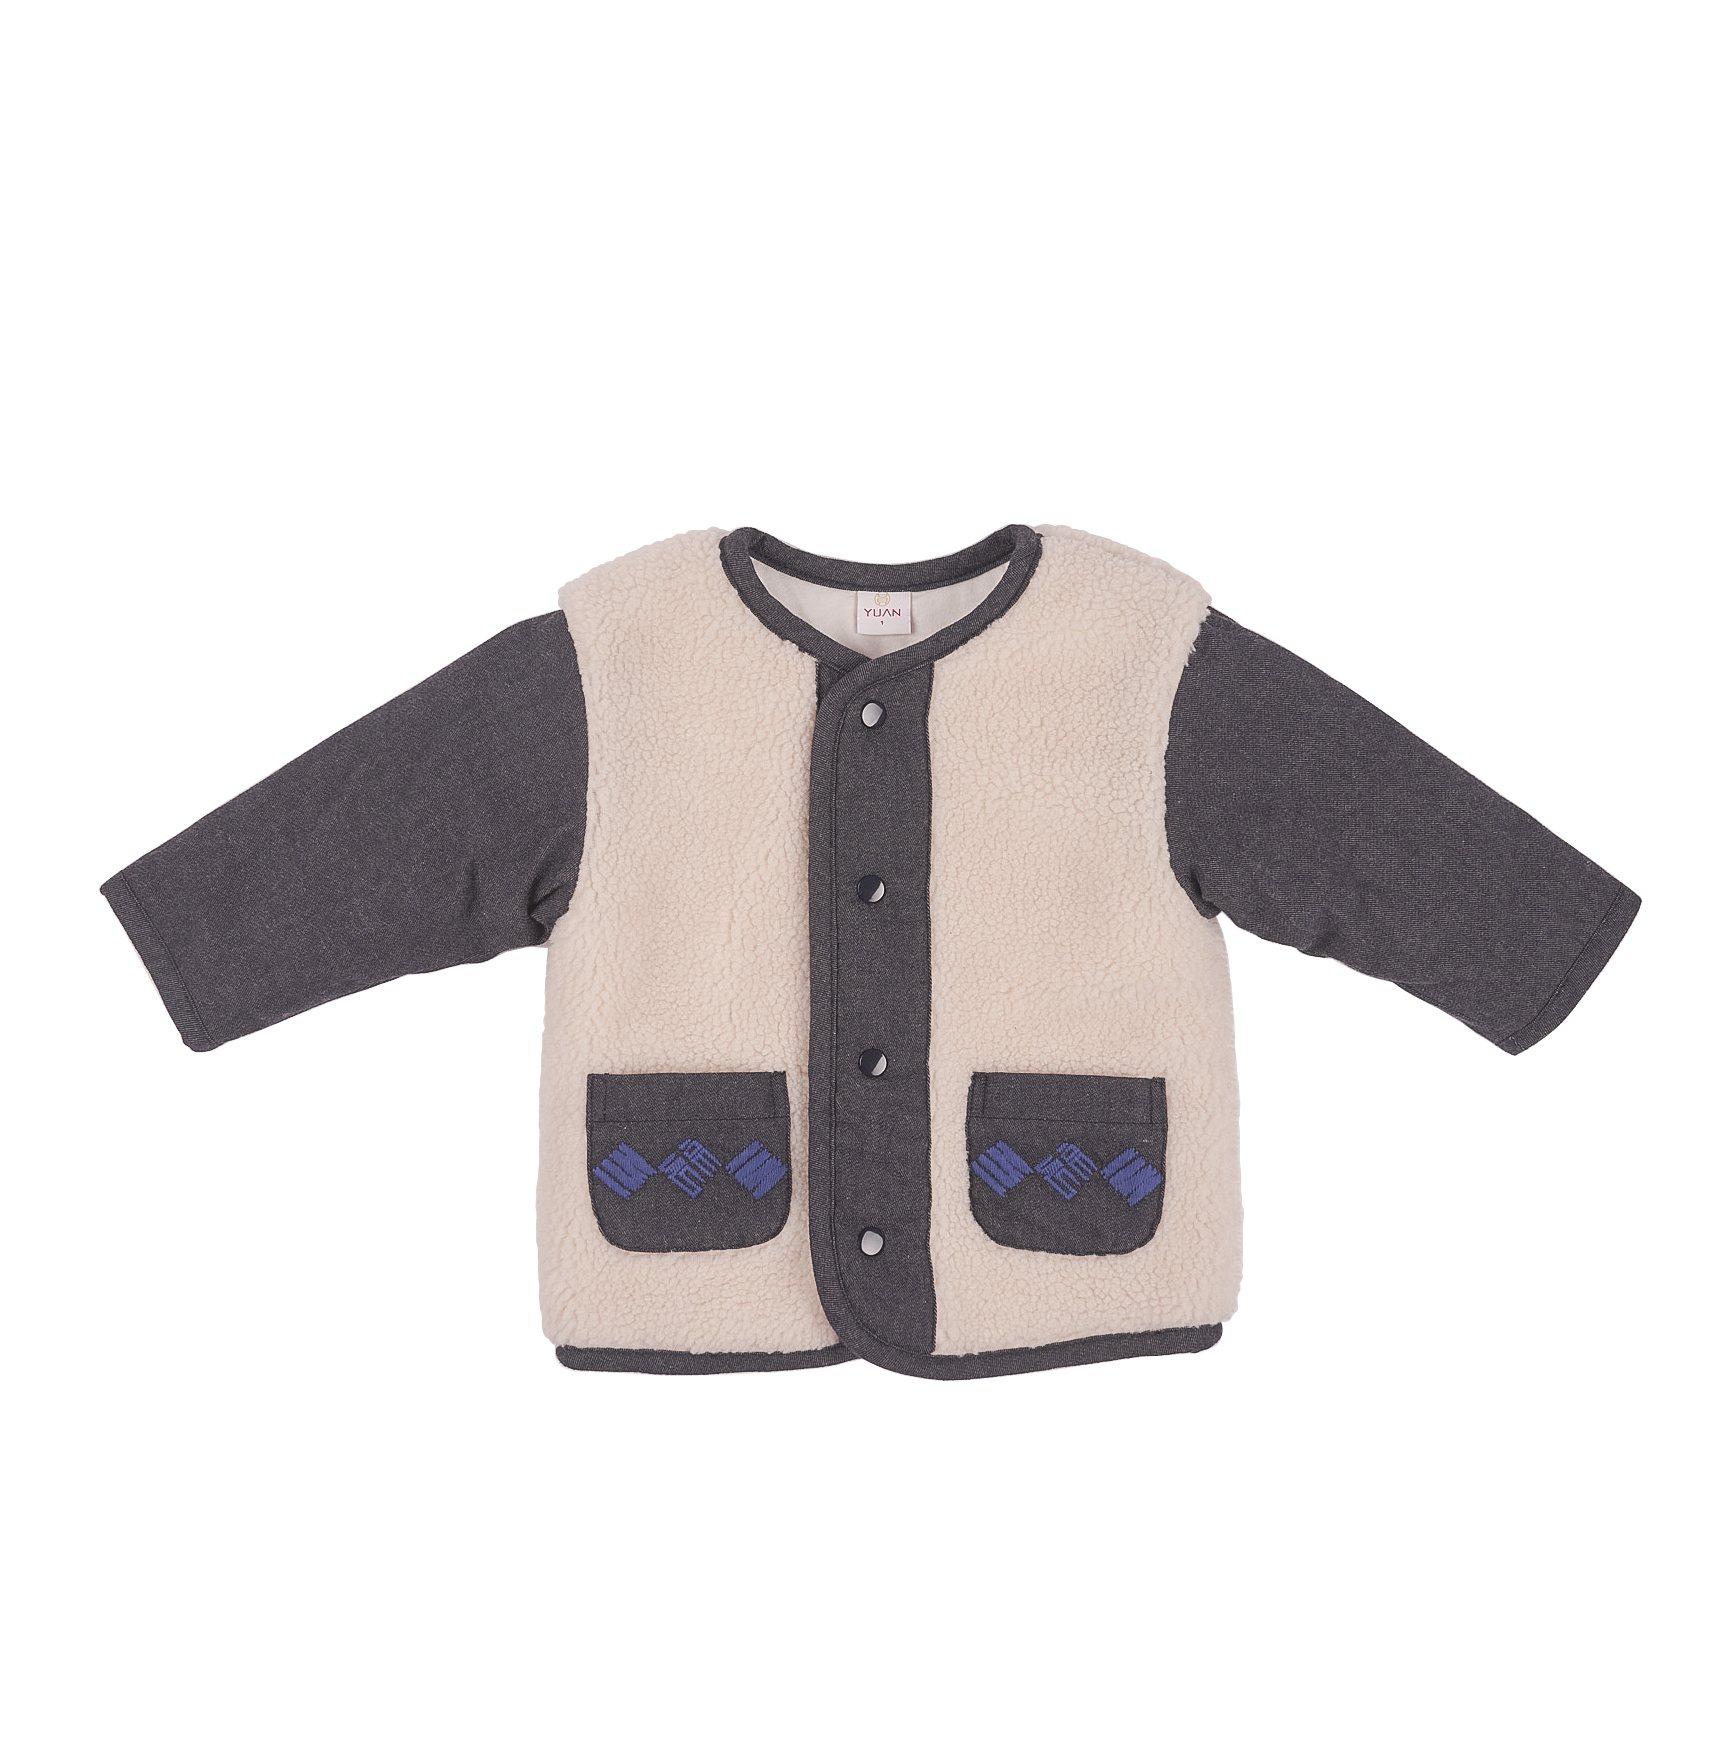 Oatmeal baby fleece jacket with good fortune pockets